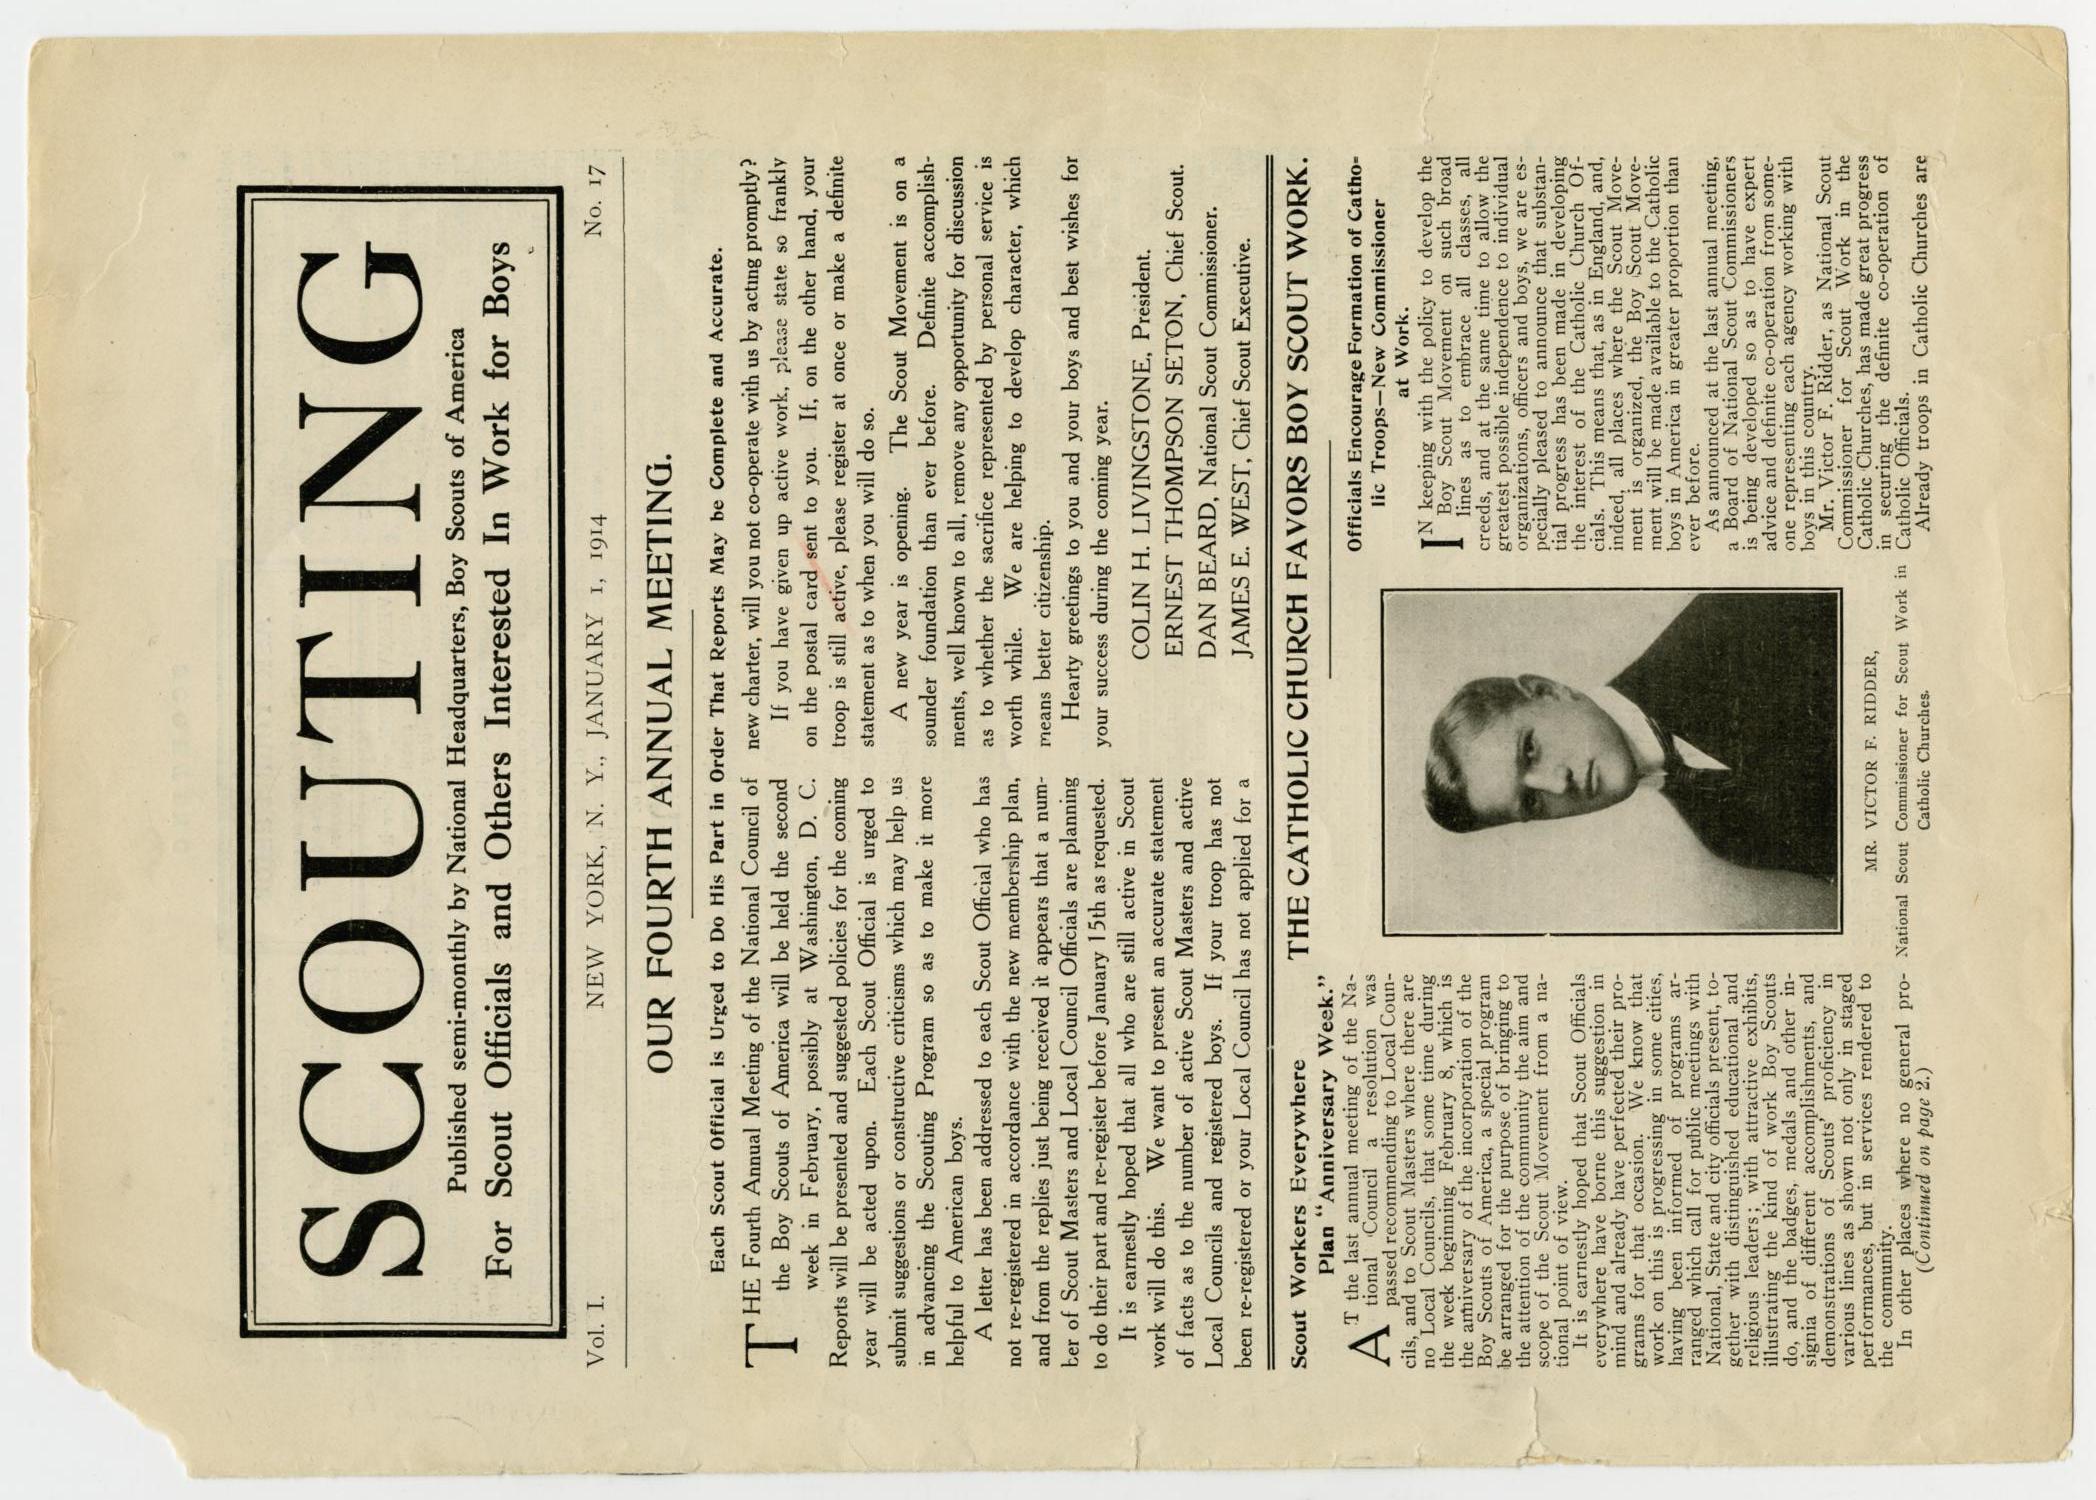 Scouting, Volume 1, Number 17, January 1, 1914
                                                
                                                    1
                                                